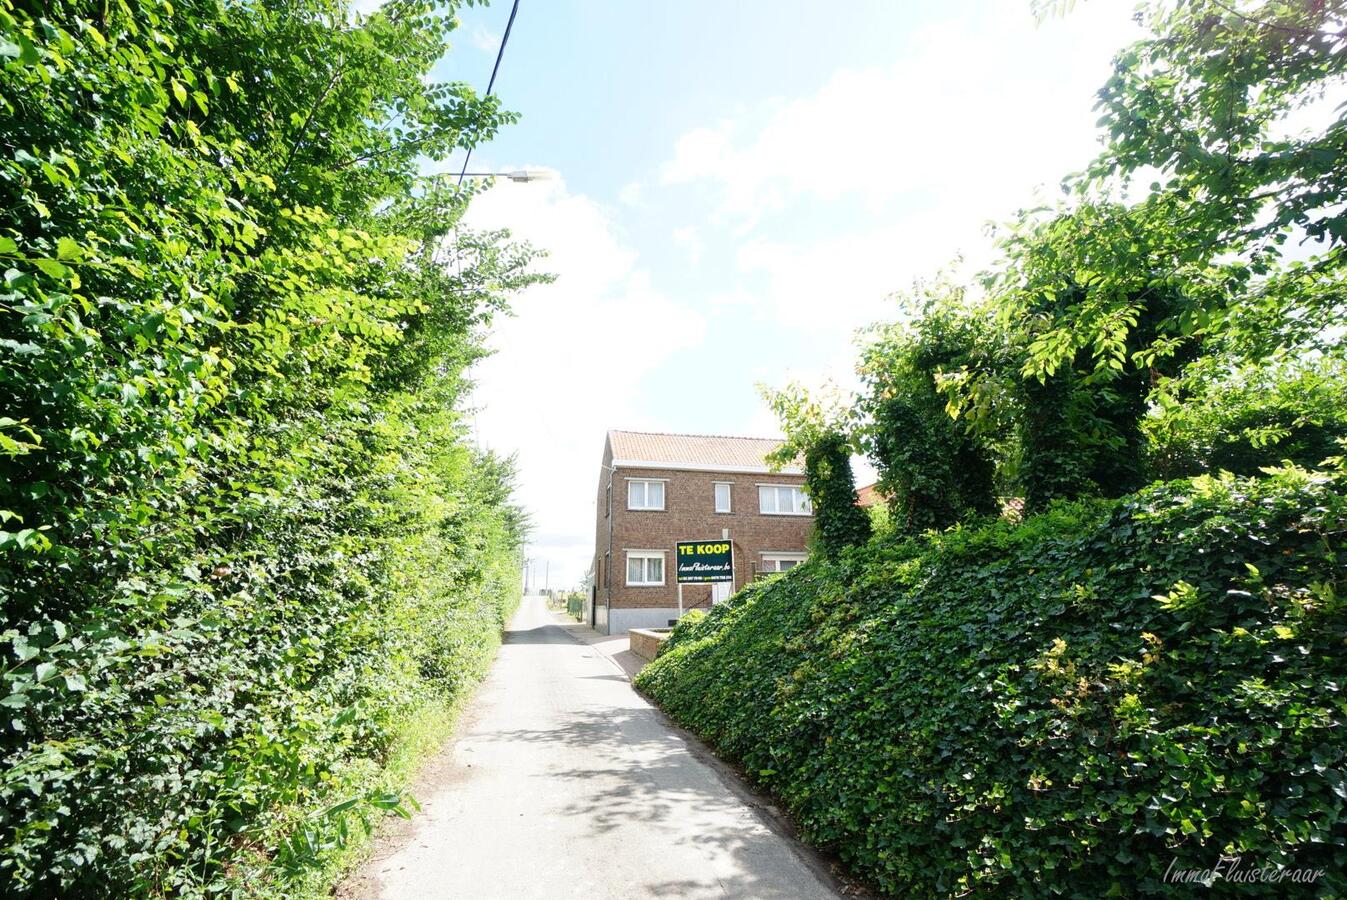 Property for sale |  with option - with restrictions in Horpmaal